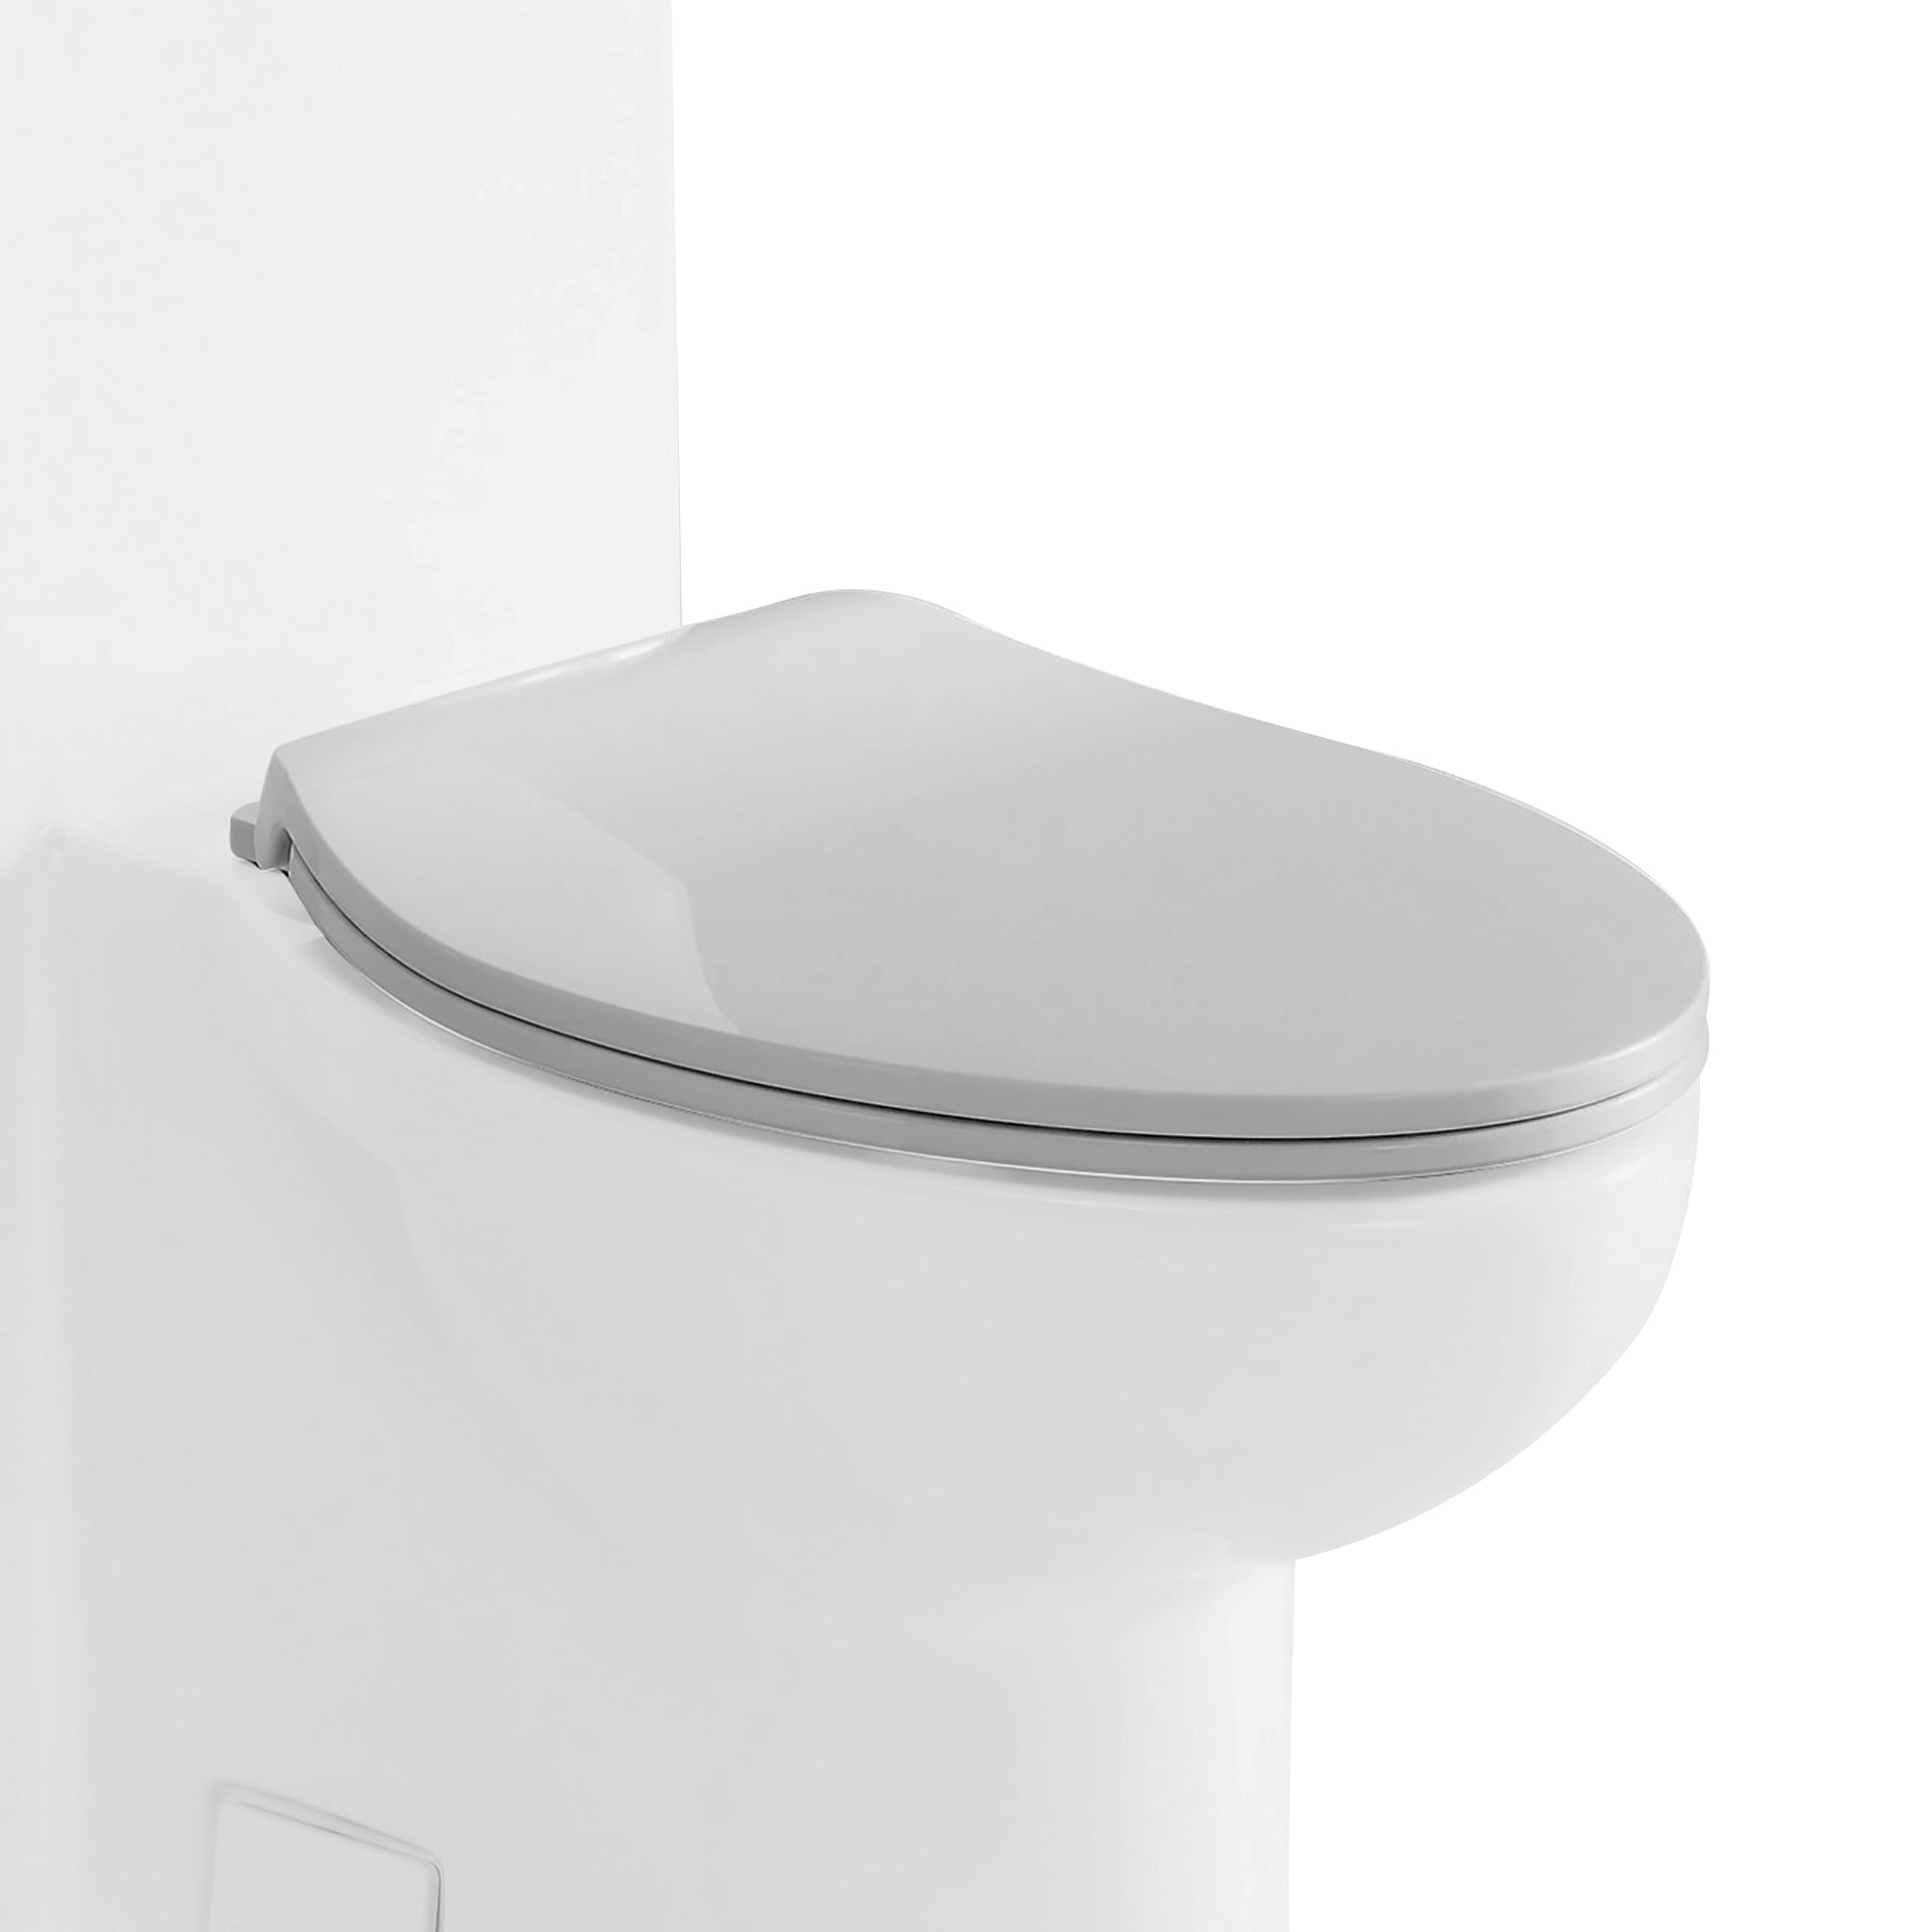 R-377seat Replacement Soft Closing Plastic Toilet Seat, White For Tb377